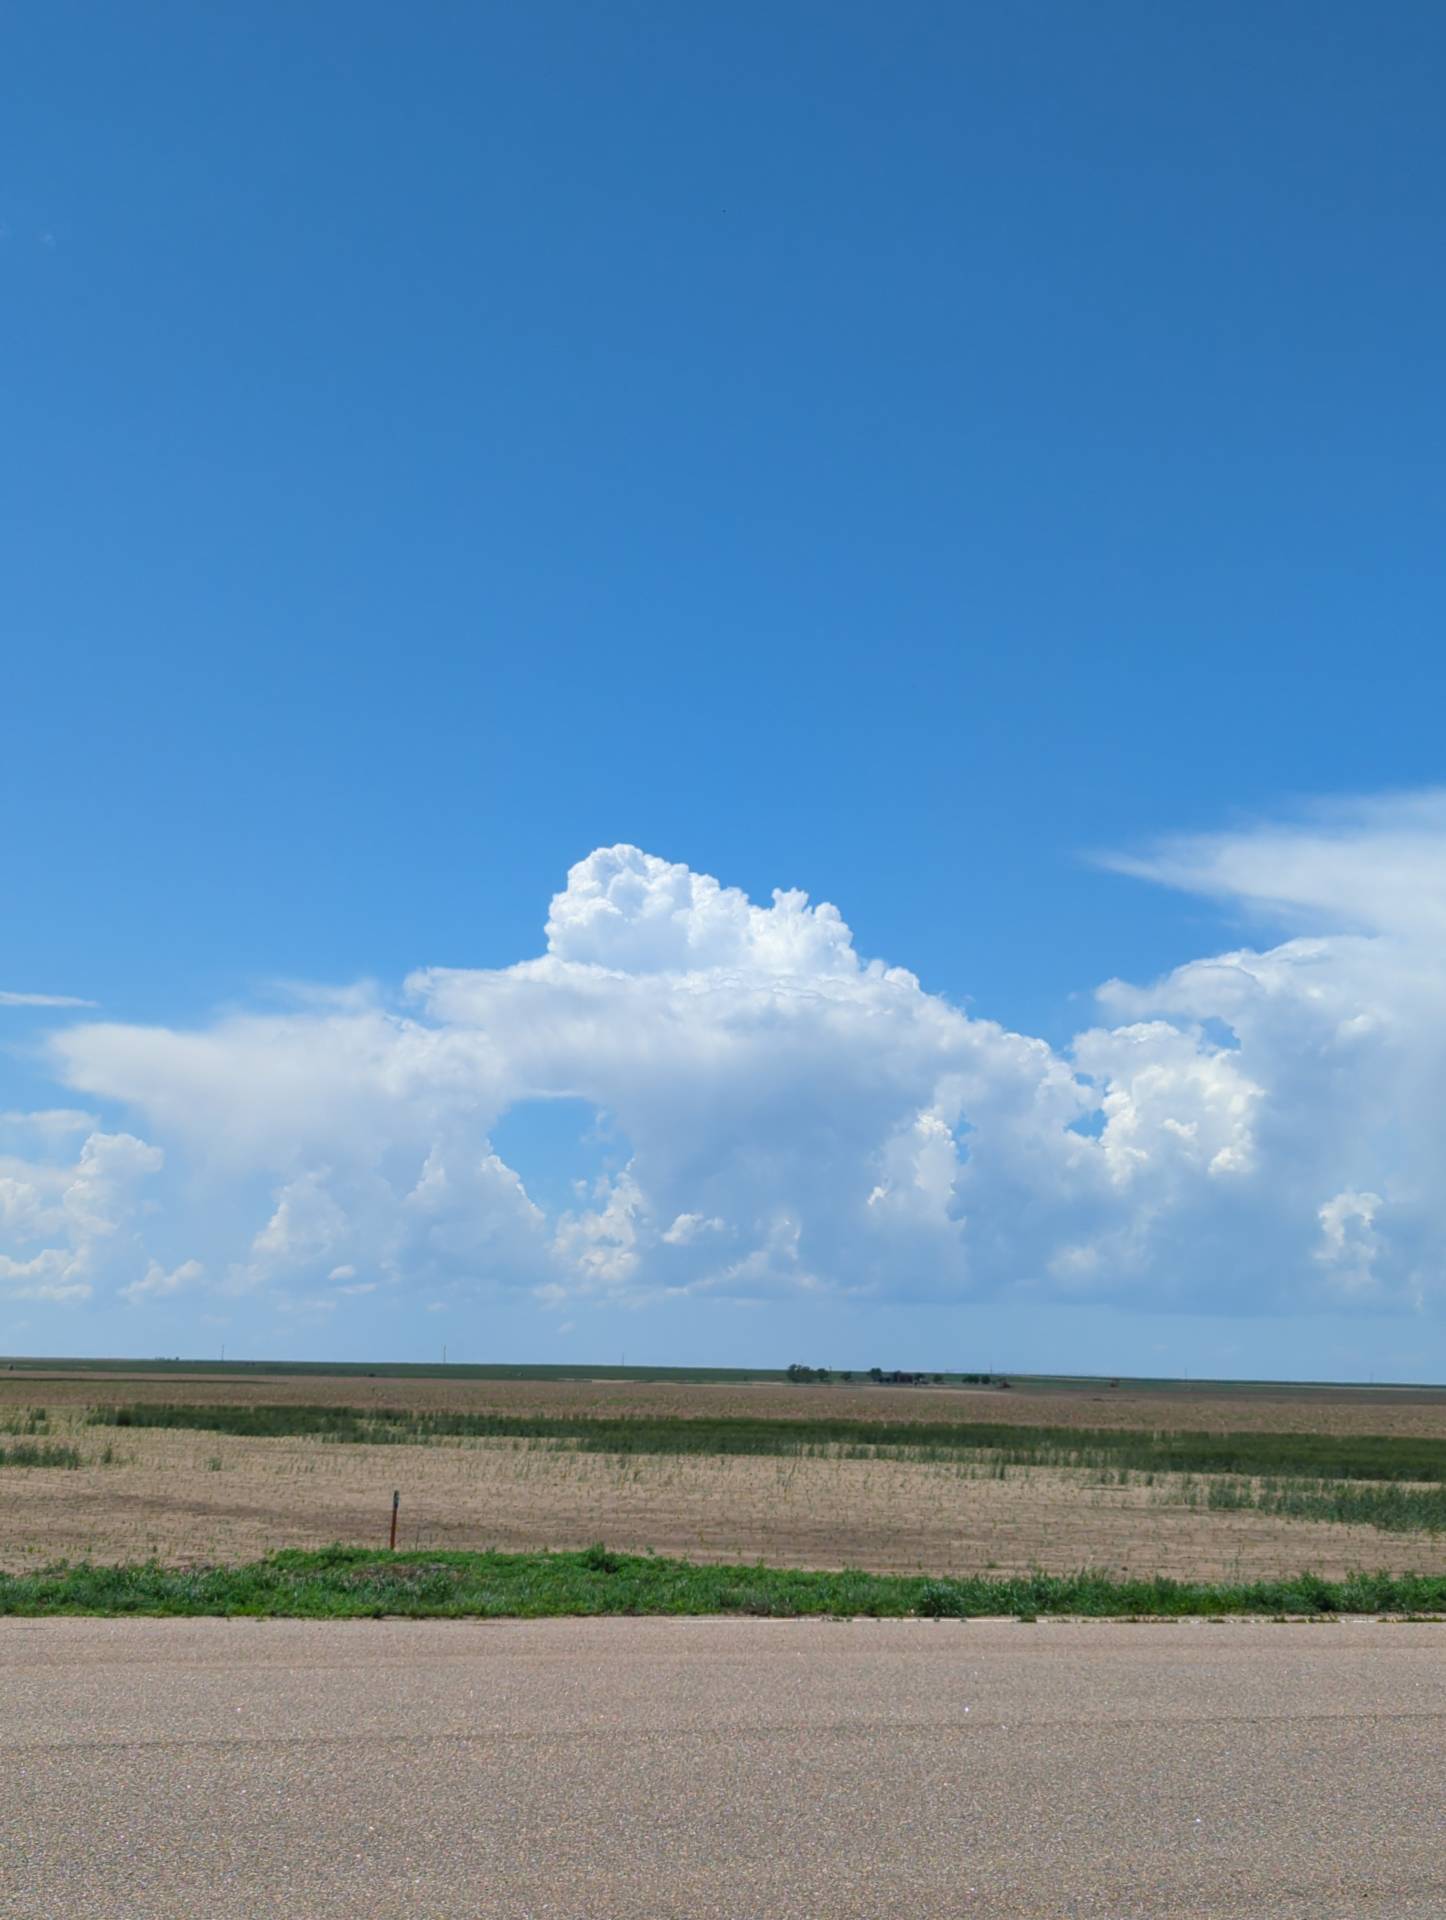 Storms attempting to develop west of Johnson City, Kansas.